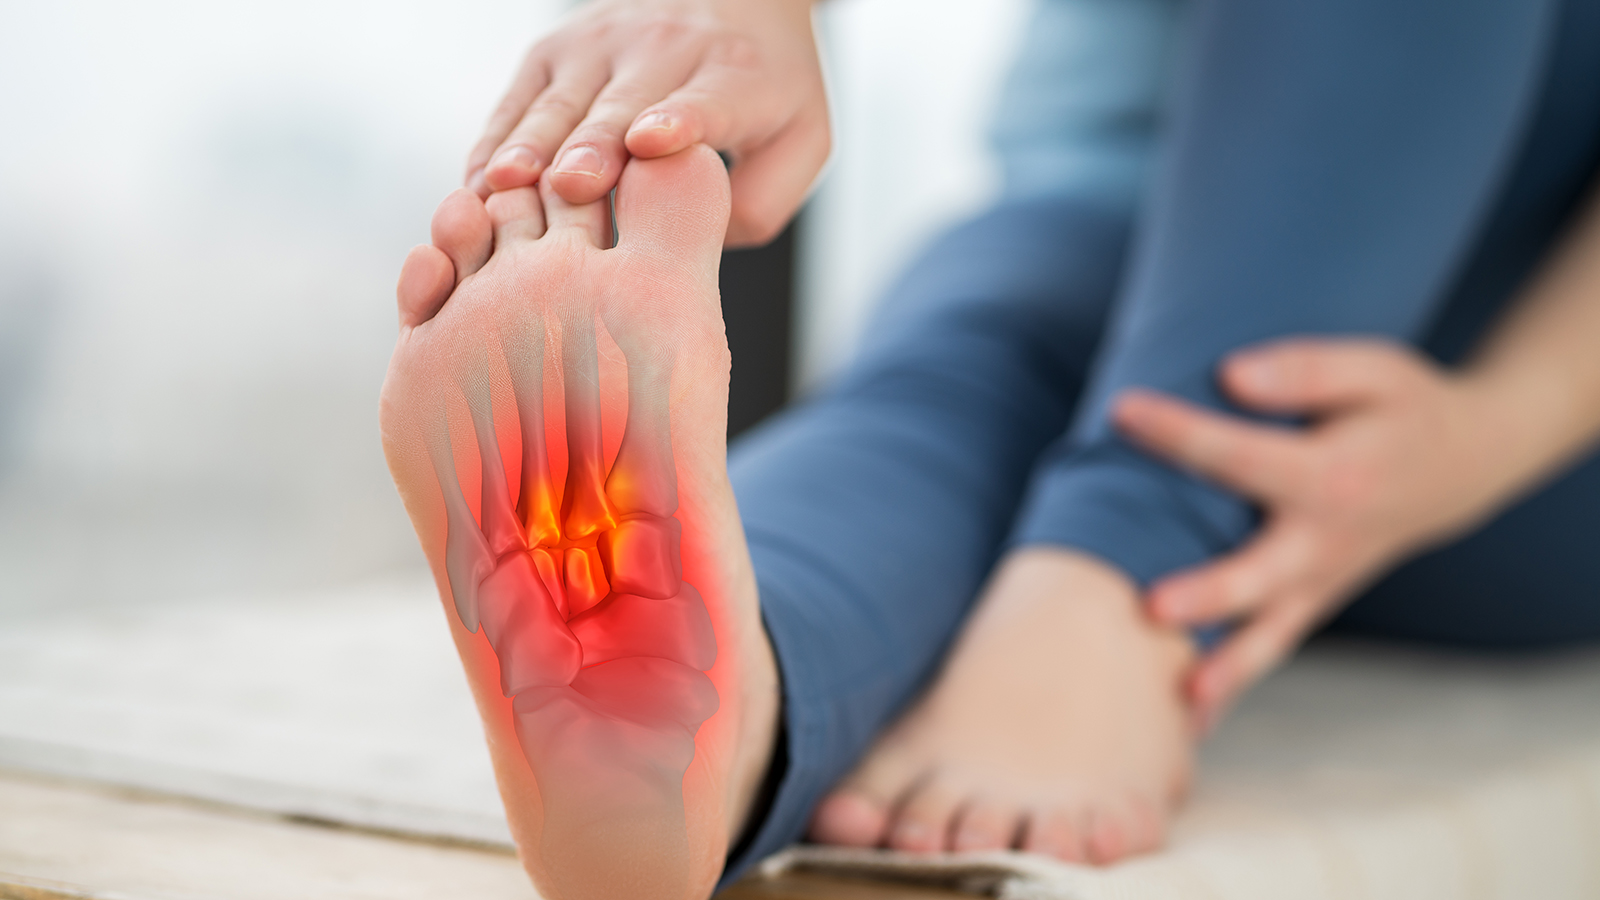 Plantar fasciitis: How is it treated and who's at risk?